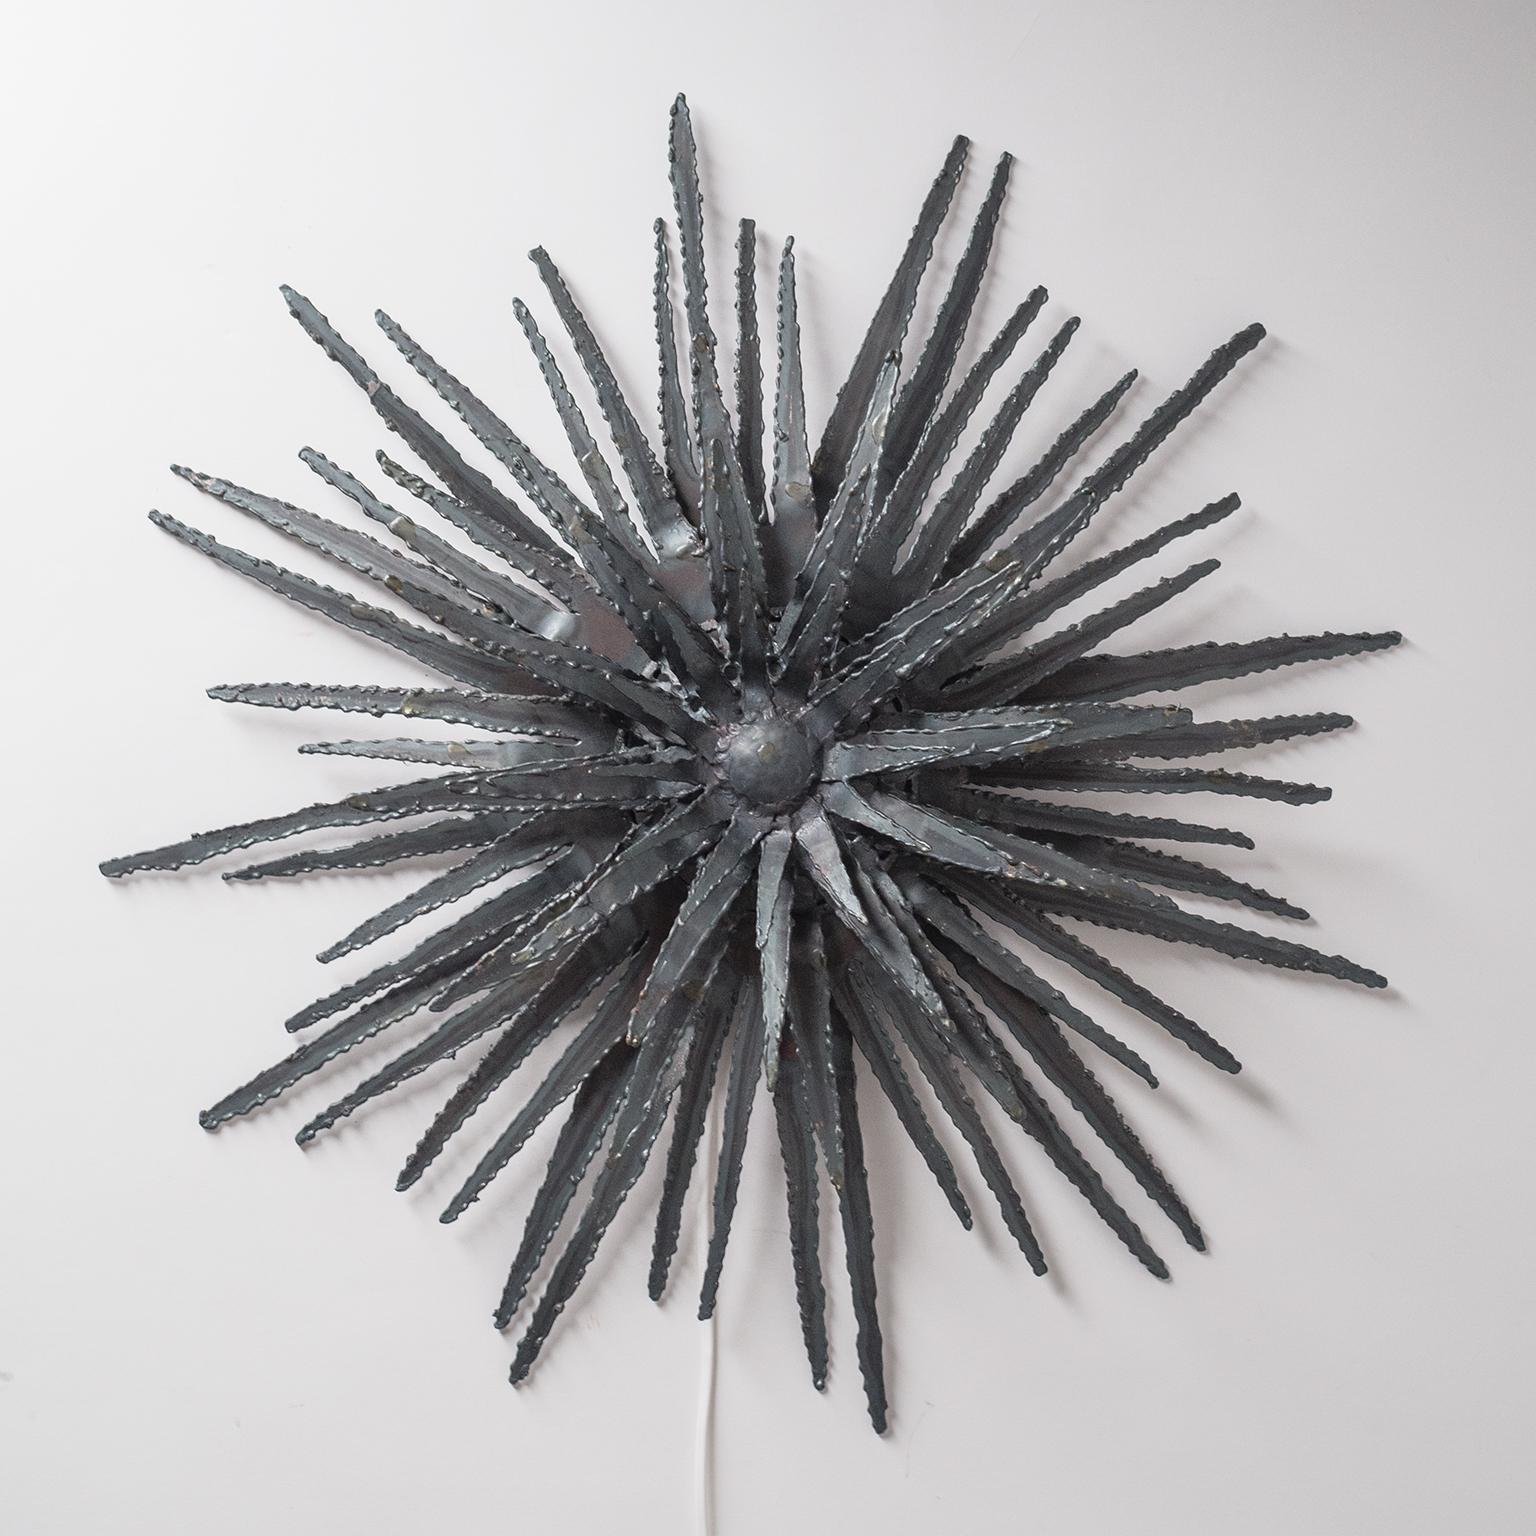 Rare brutalist wall sculpture/light from the 1960s. Made of lacquered multi-layer torch-cut sheet metal this has a wonderful abstract organic structure, akin to a sea-urchin or thistle. One brass and ceramic E14 socket with new wiring.